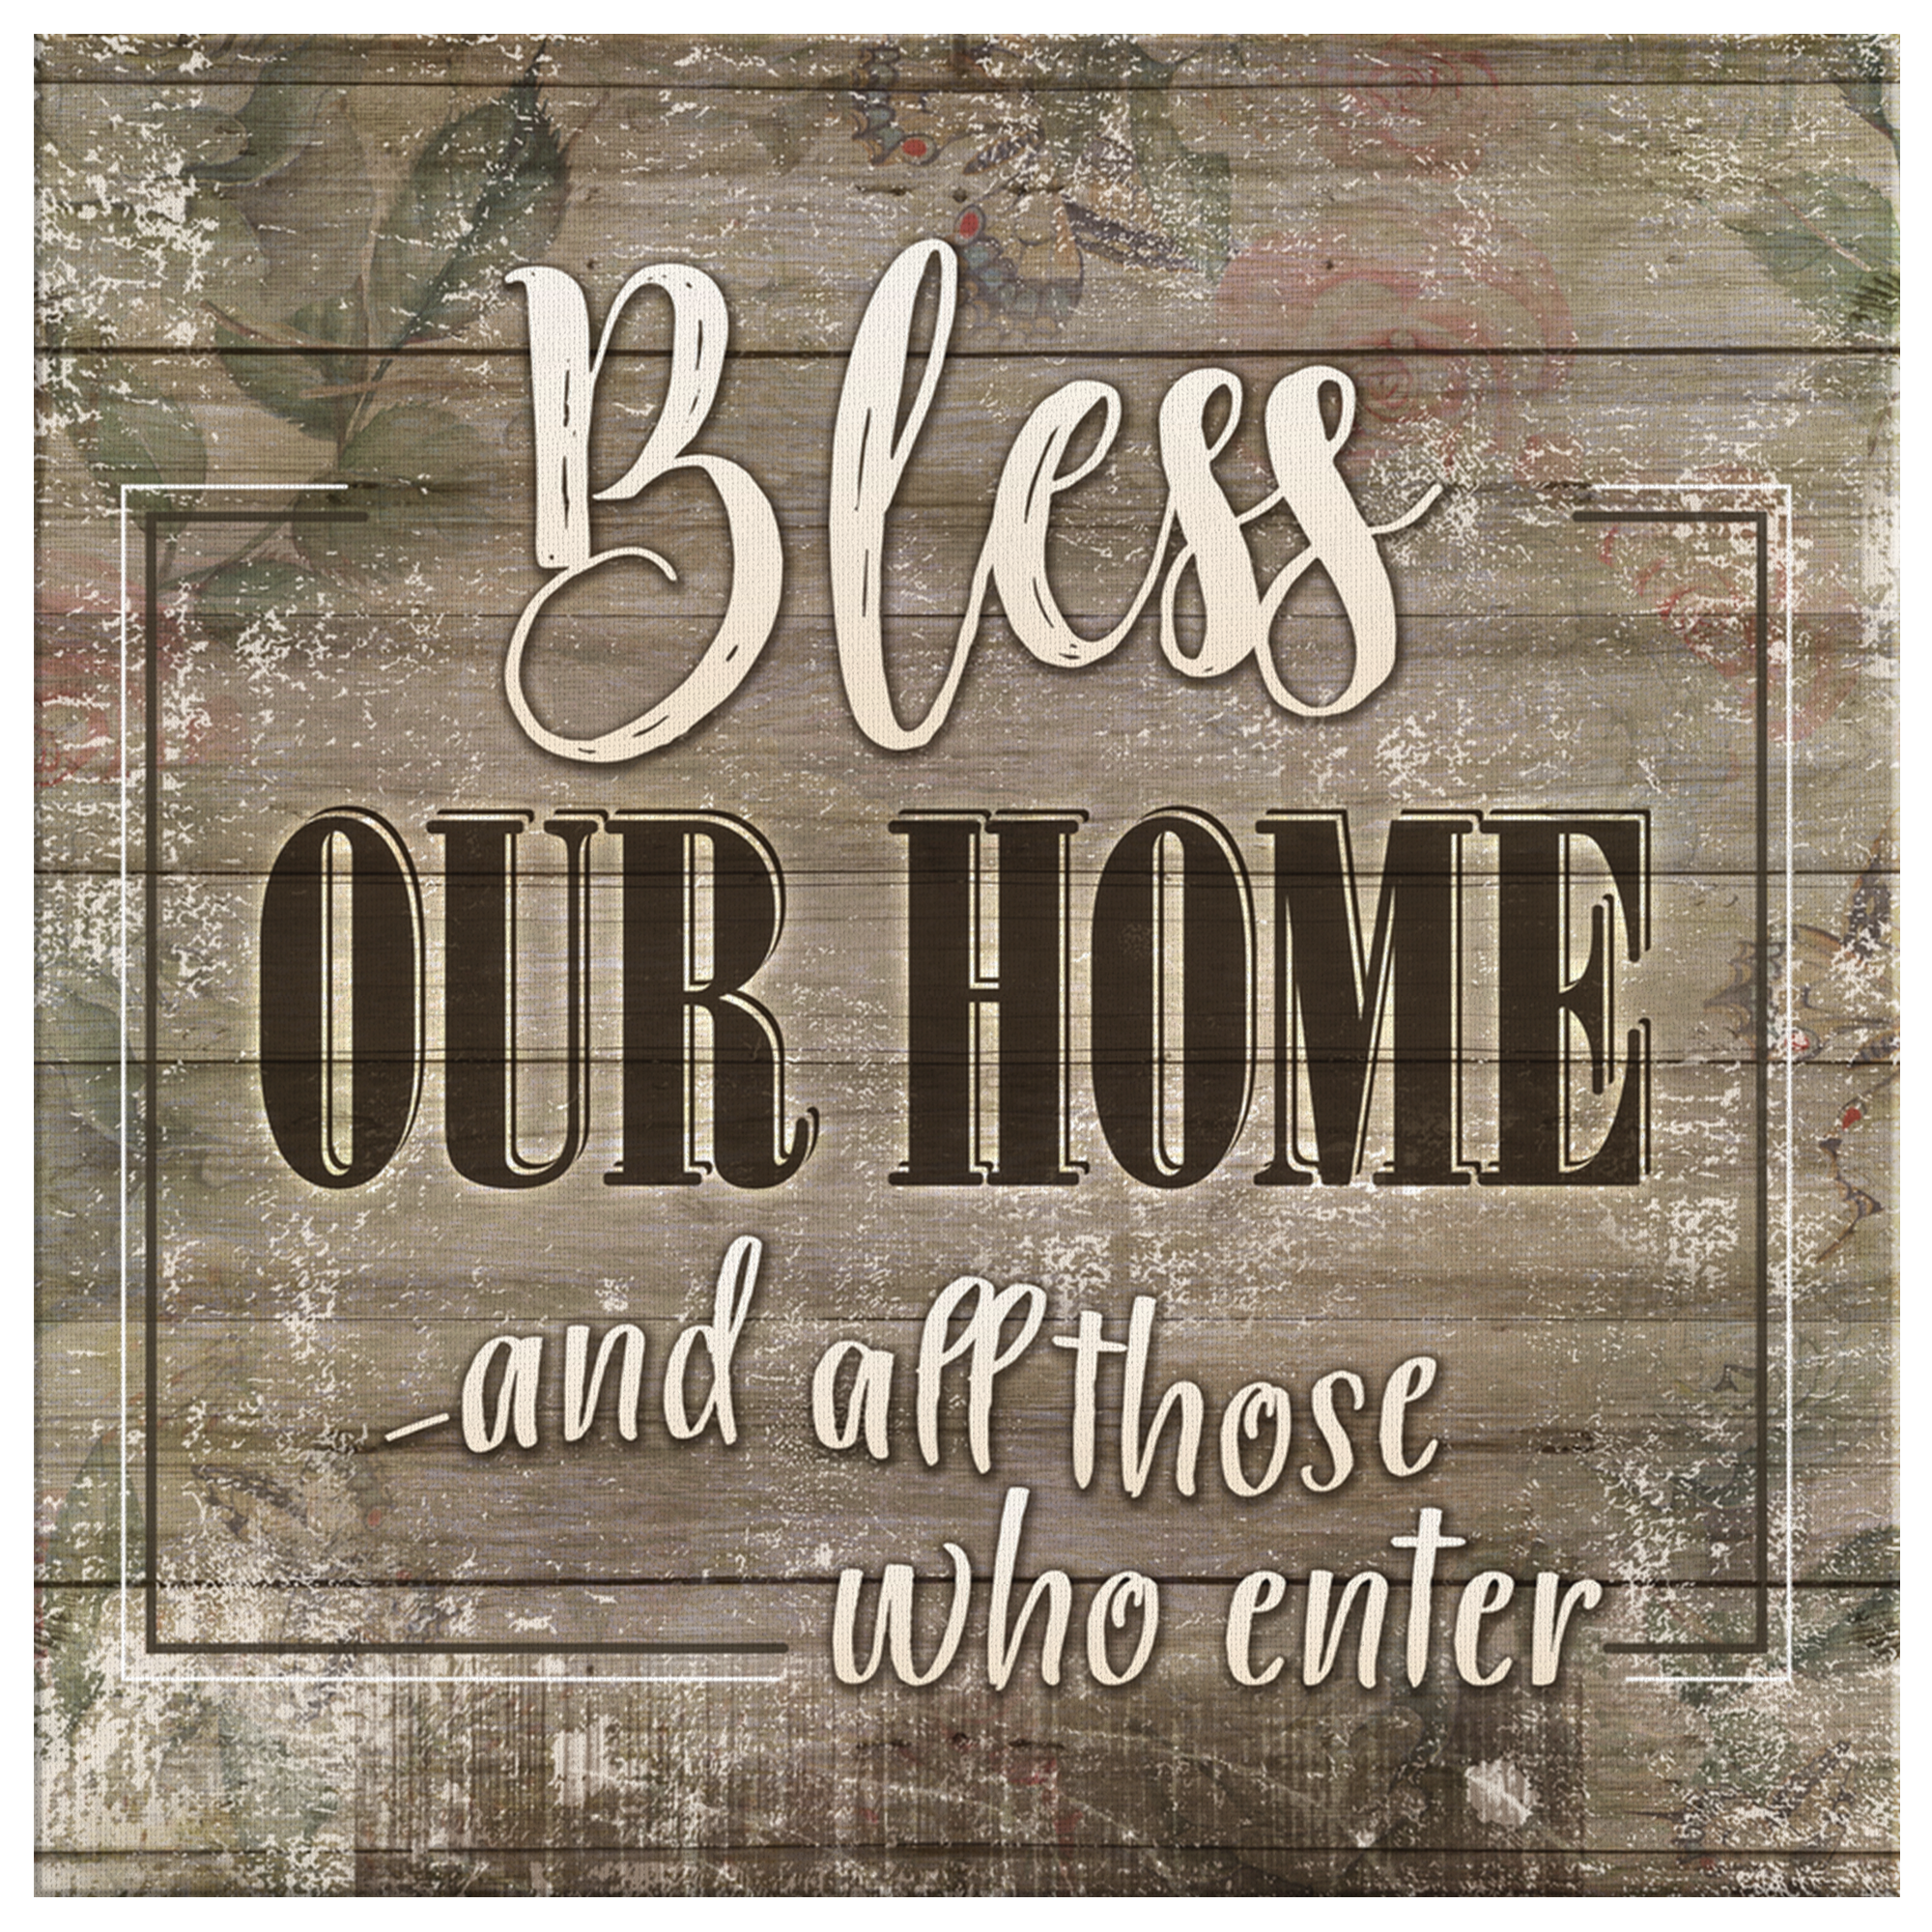 "Bless Our Home - And All Those Who Enter" Premium Canvas